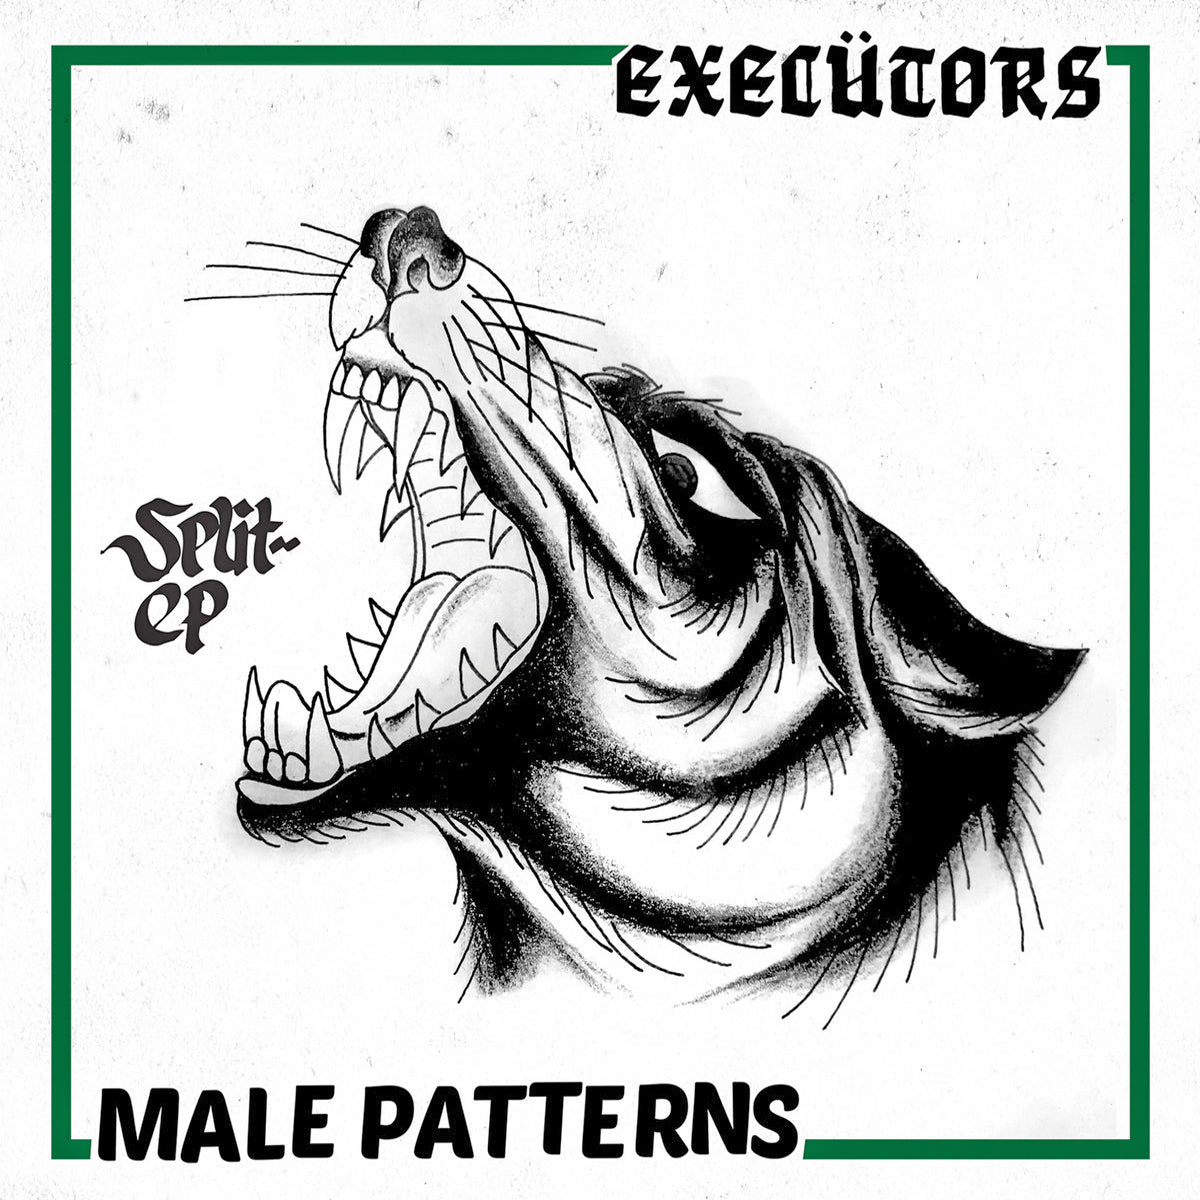 Executors / Male Patterns- Split 7" ~CRO-MAGS / EX OC RIPPERS!